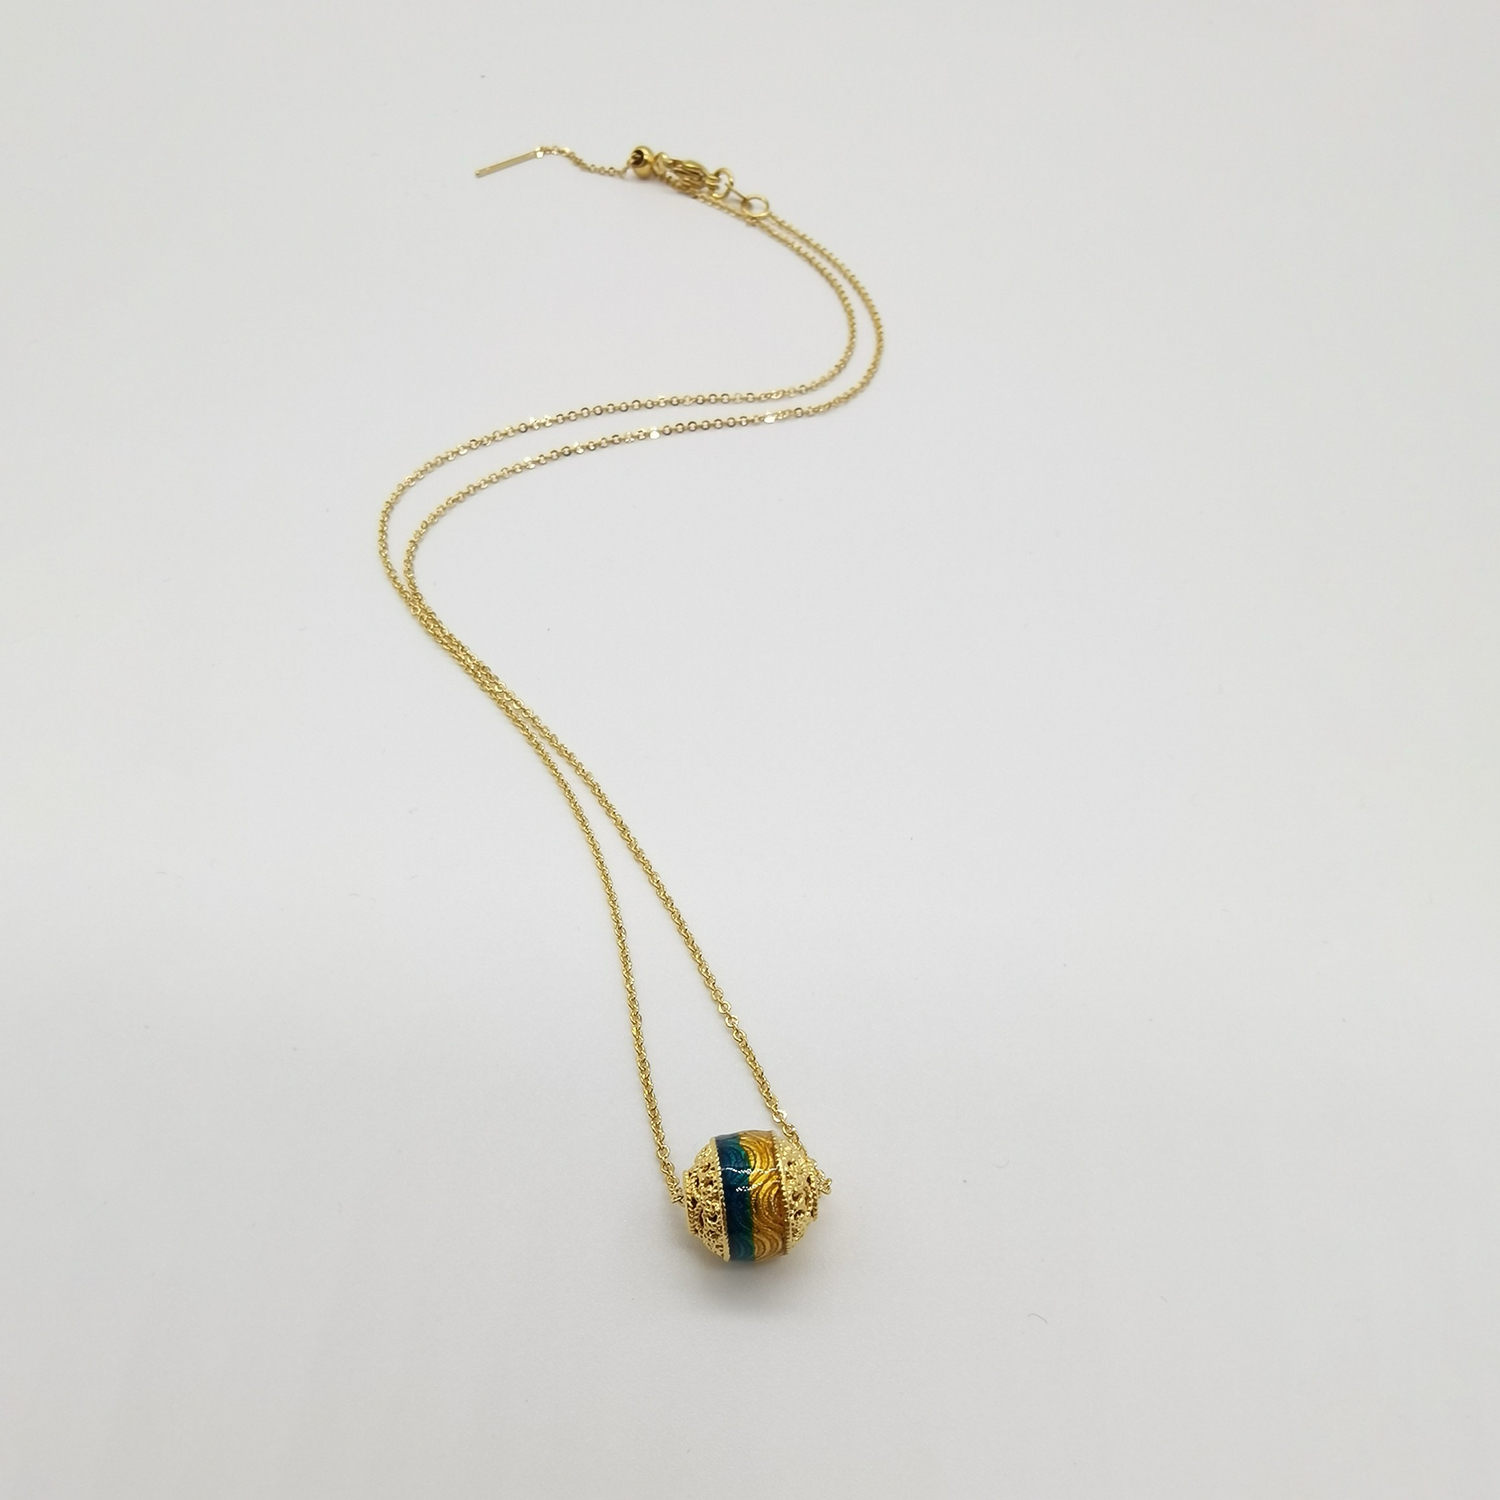 Alluvial gold ancient method vacuum electroplating 24K gold Qianli Jiangshan transfer bead necklace